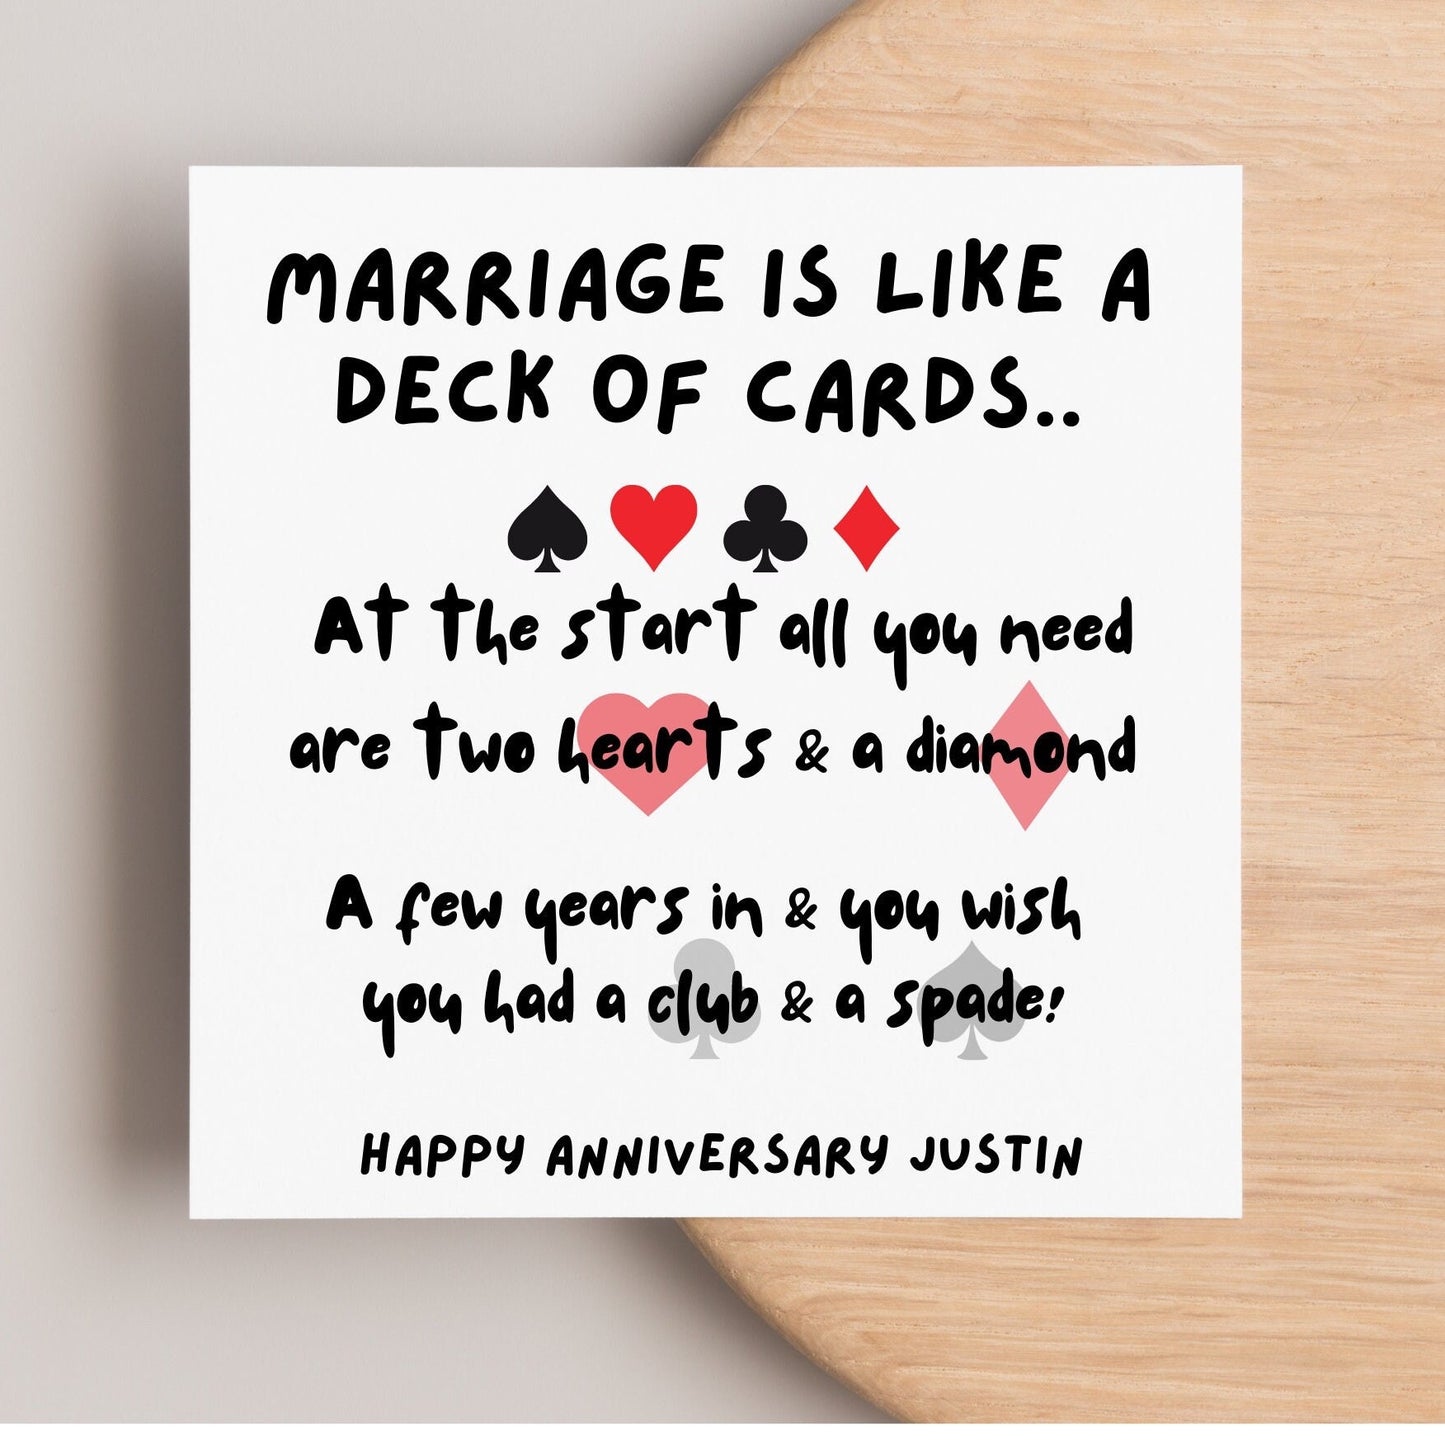 Marriage is like a deck of cards, funny anniversary card for husband and wife, personalised, cheeky wedding anniversary cards